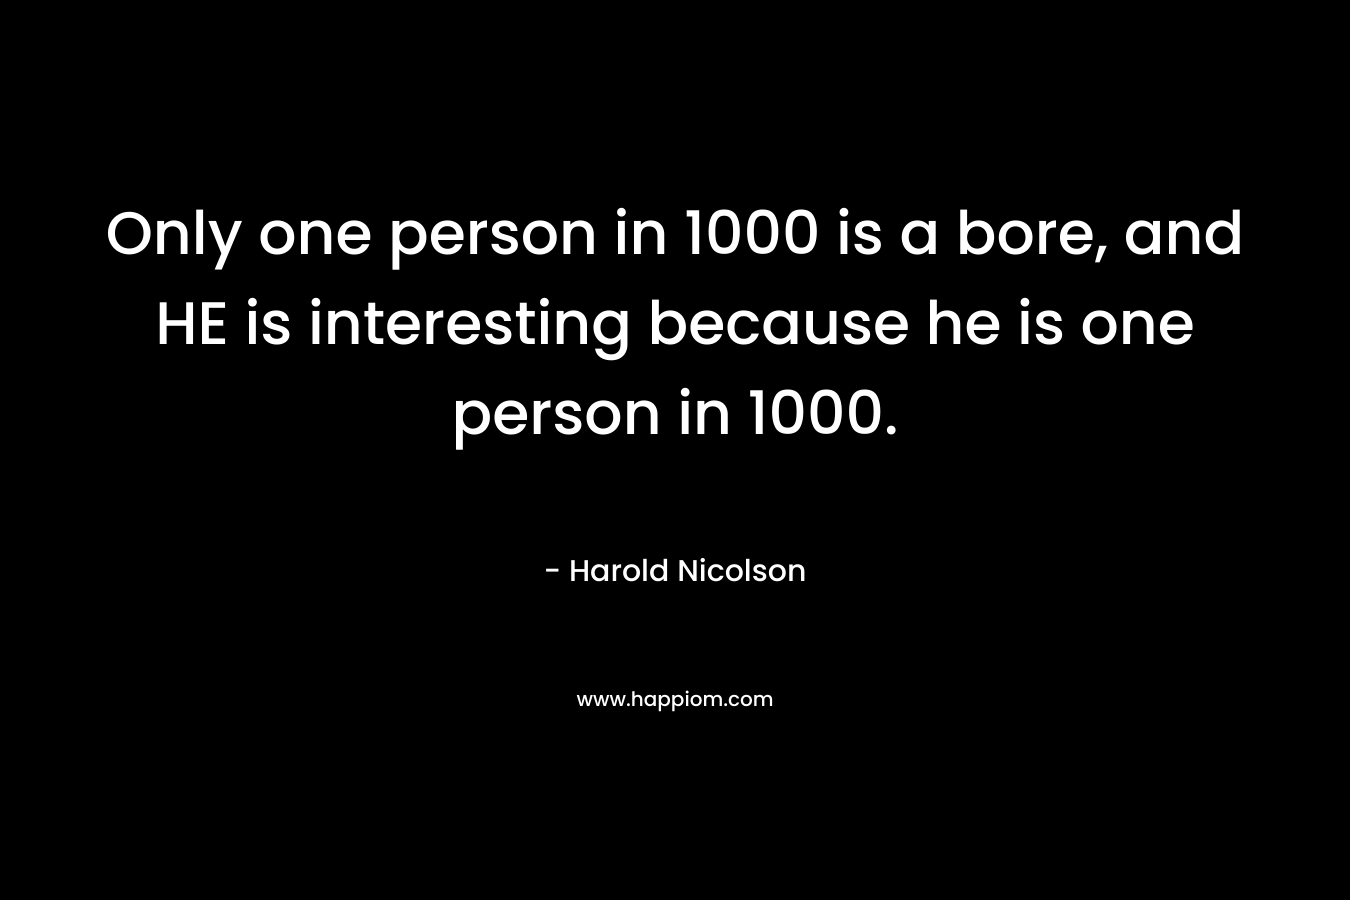 Only one person in 1000 is a bore, and HE is interesting because he is one person in 1000. – Harold Nicolson